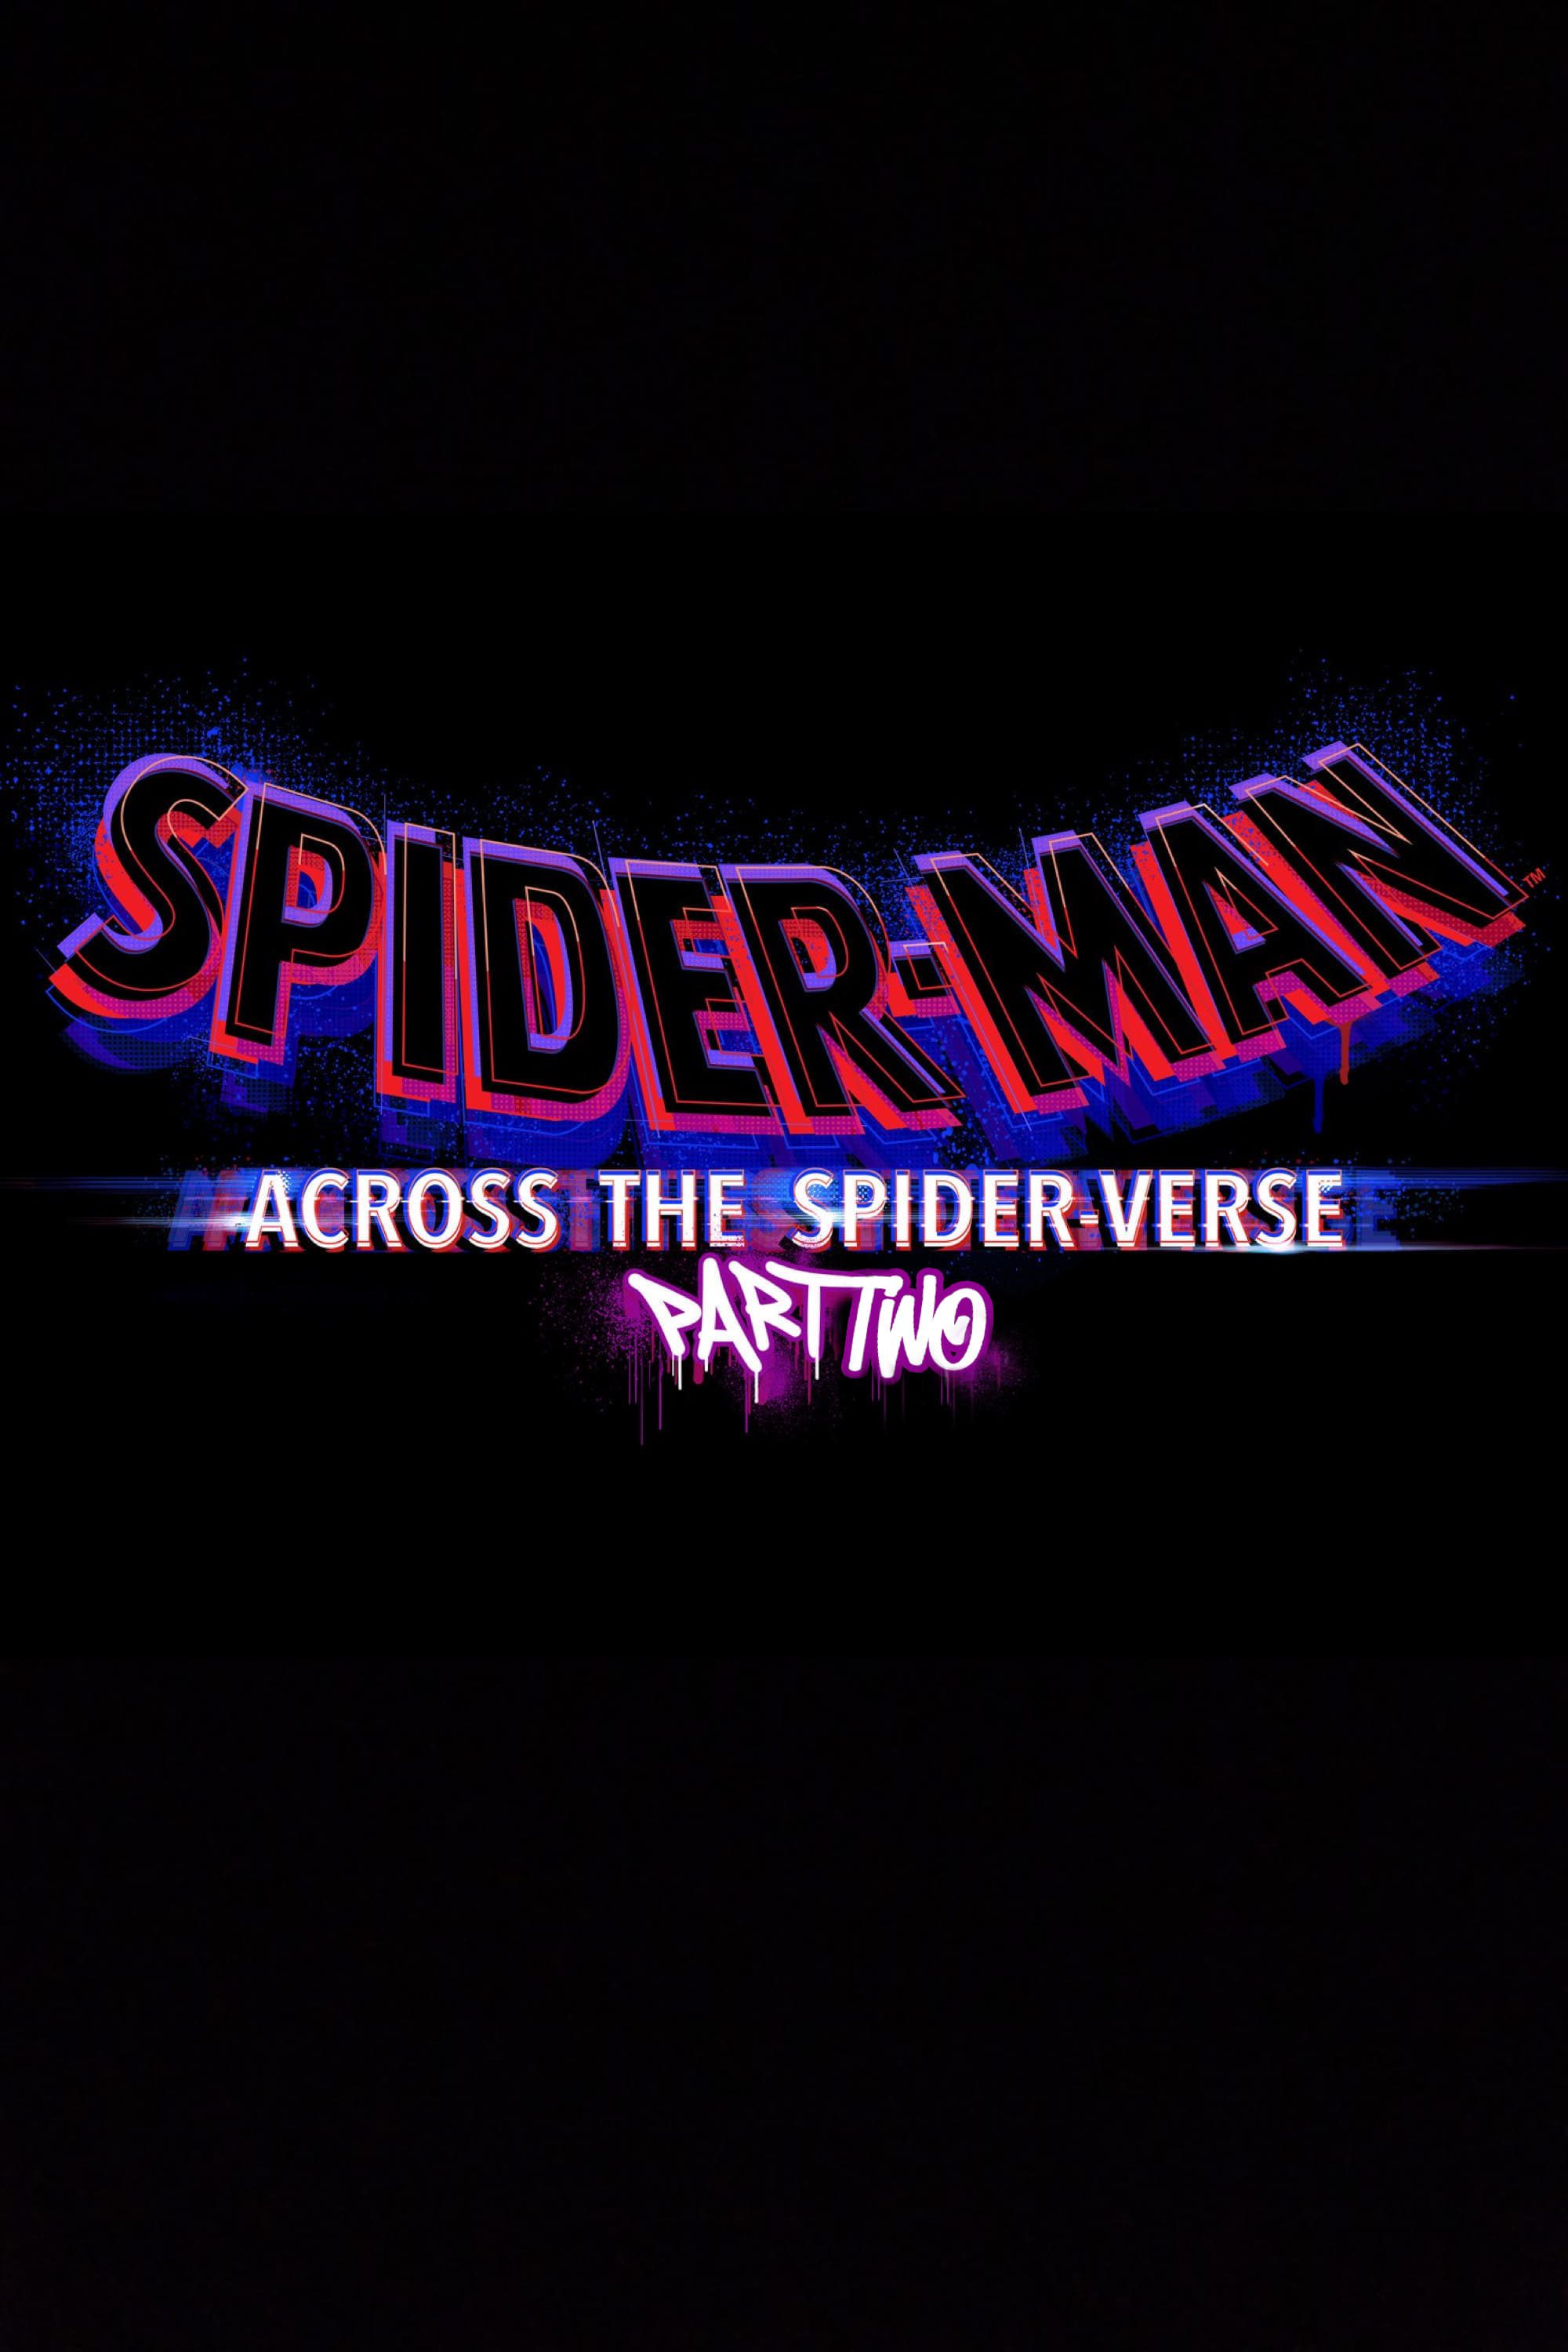 Poster for the movie "Spider-Man: Across the Spider-Verse (Part Two)"